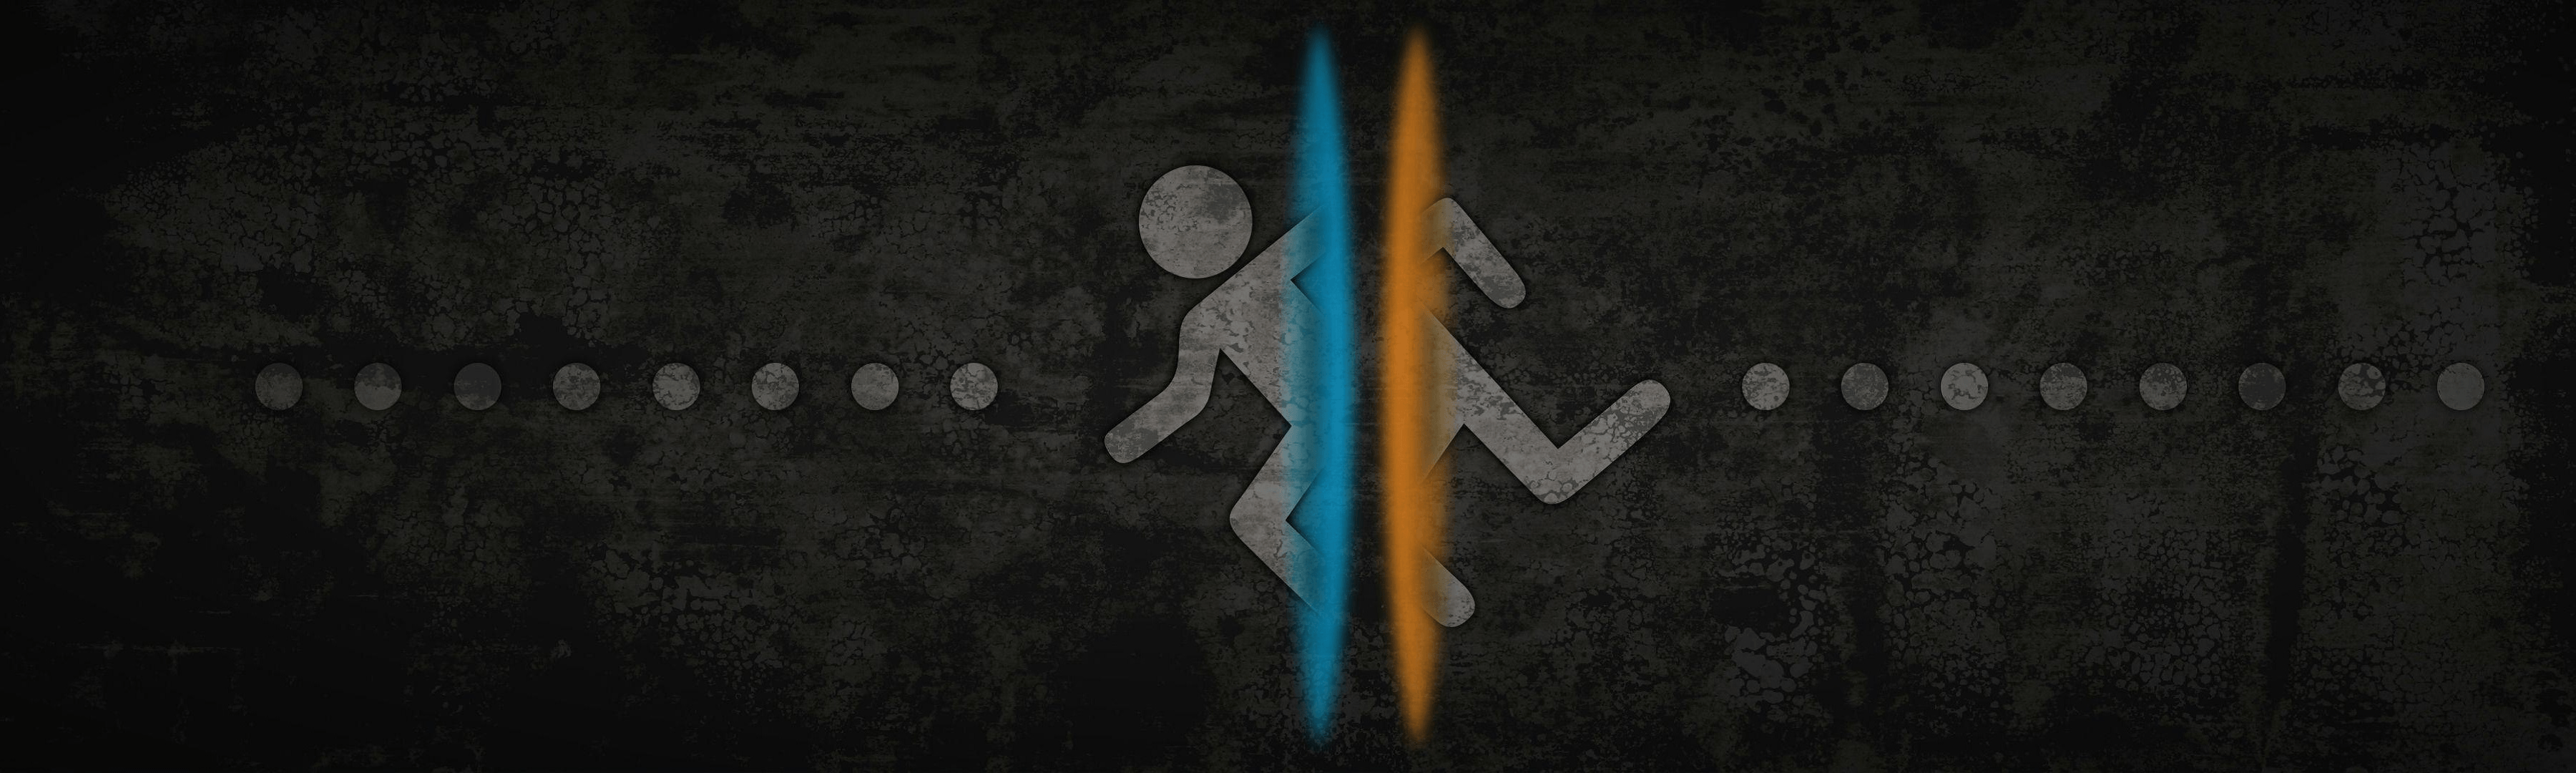 Two Monitor Wallpapers